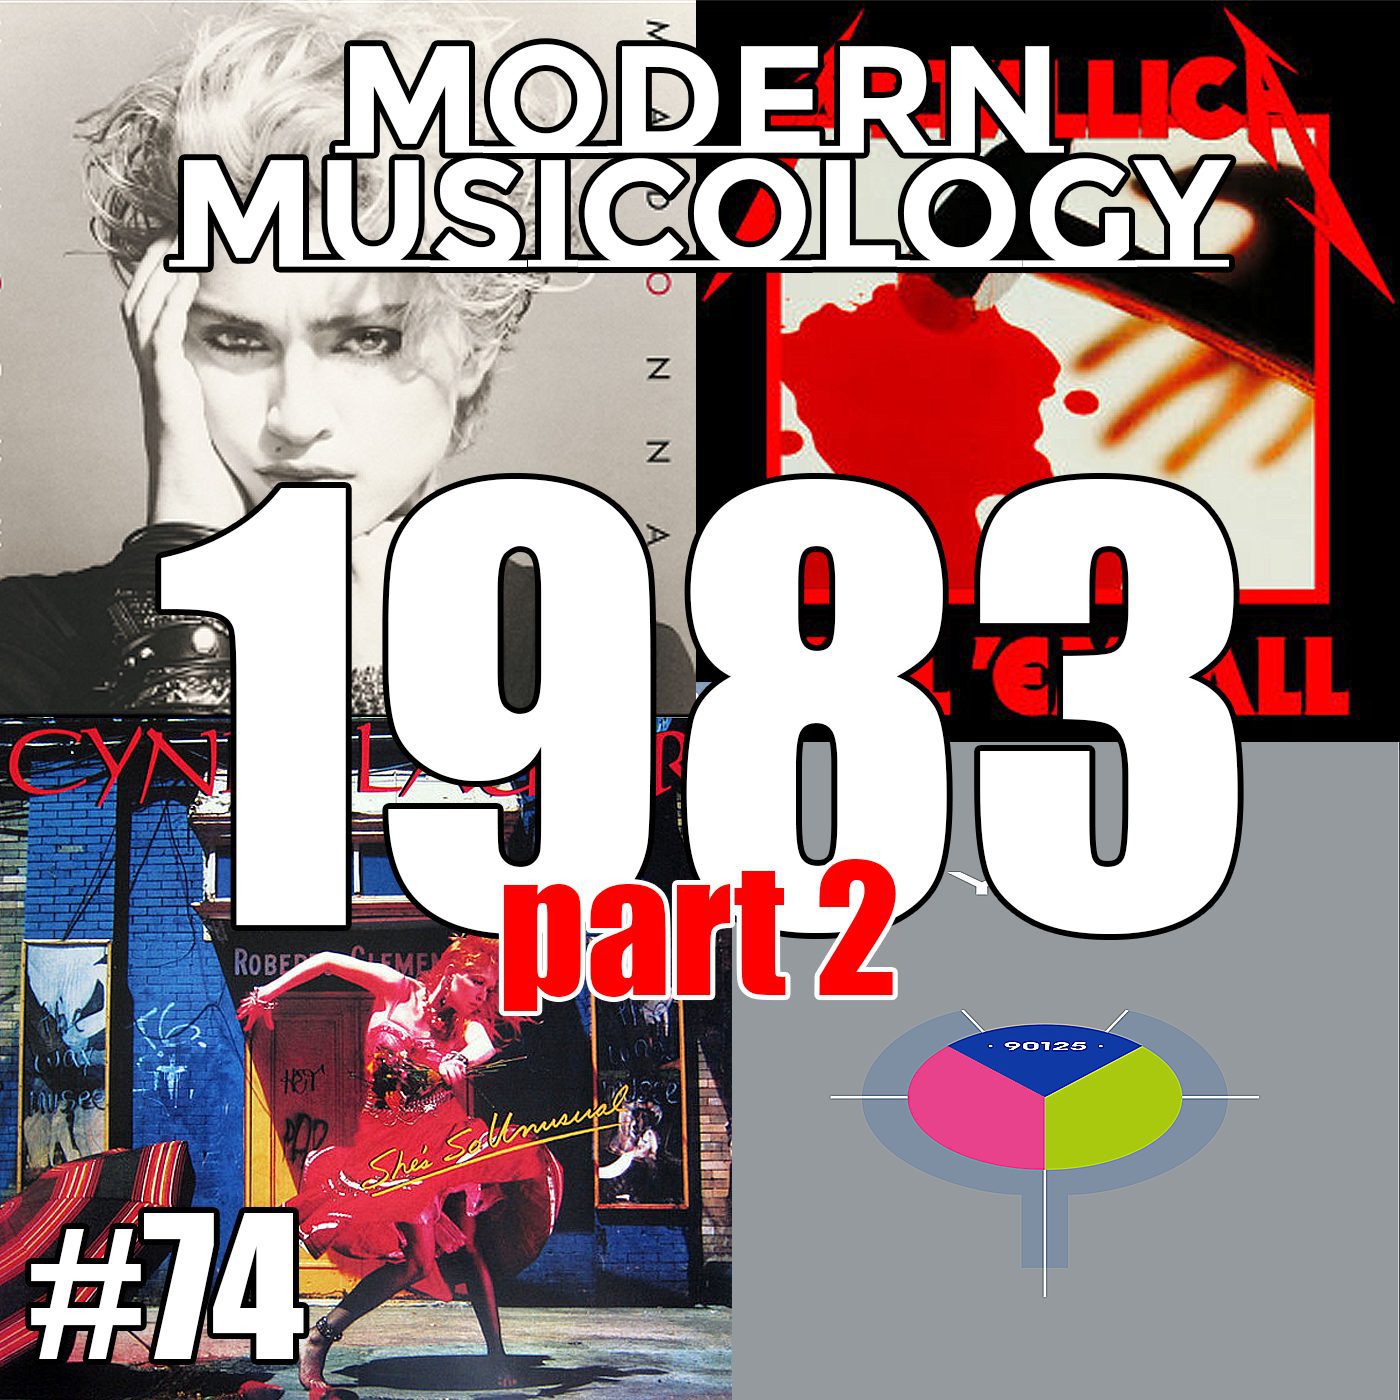 Modern Musicology #74 - The Music of 1983 Part 2